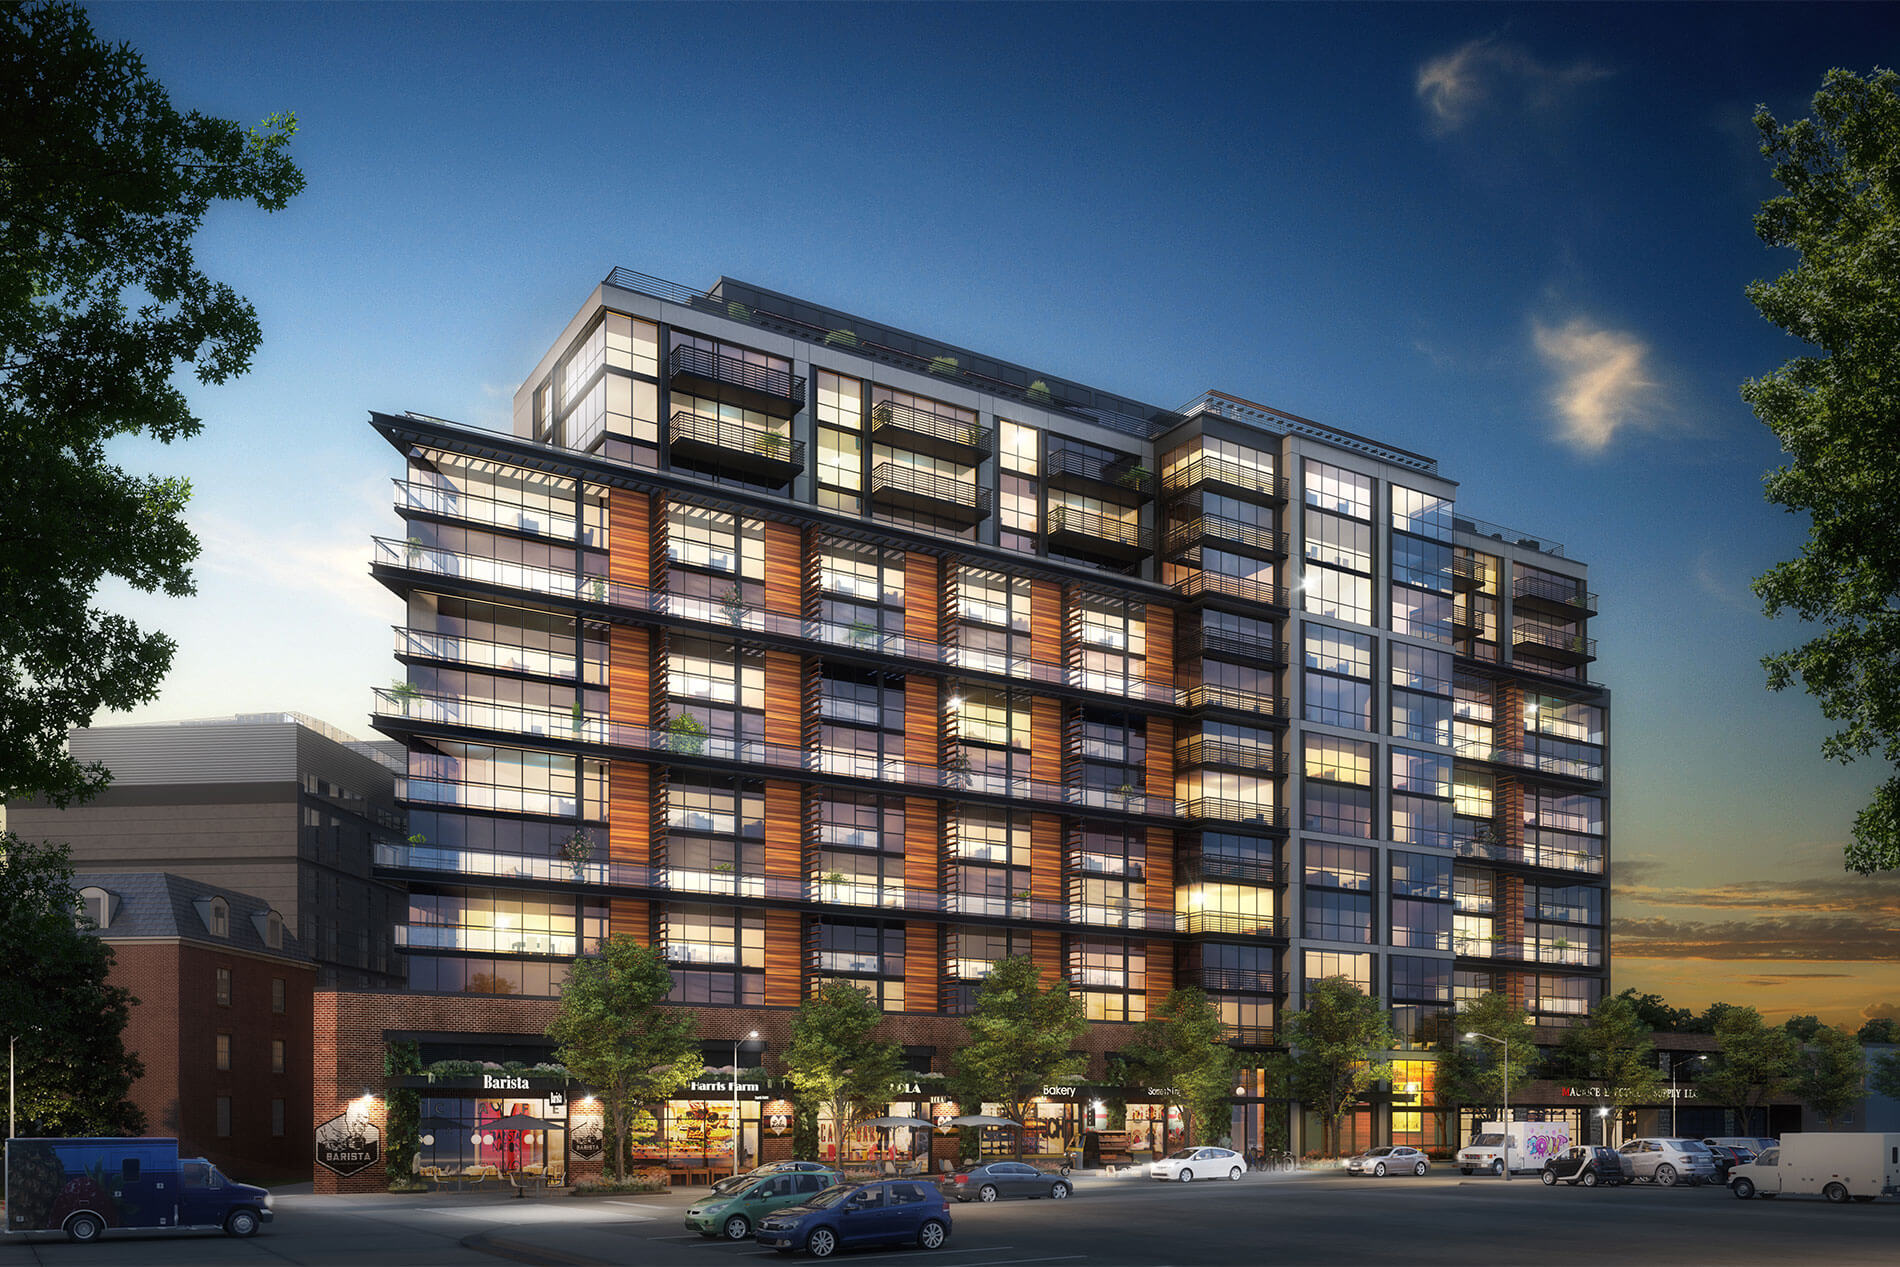 The MO exterior rendering at dusk